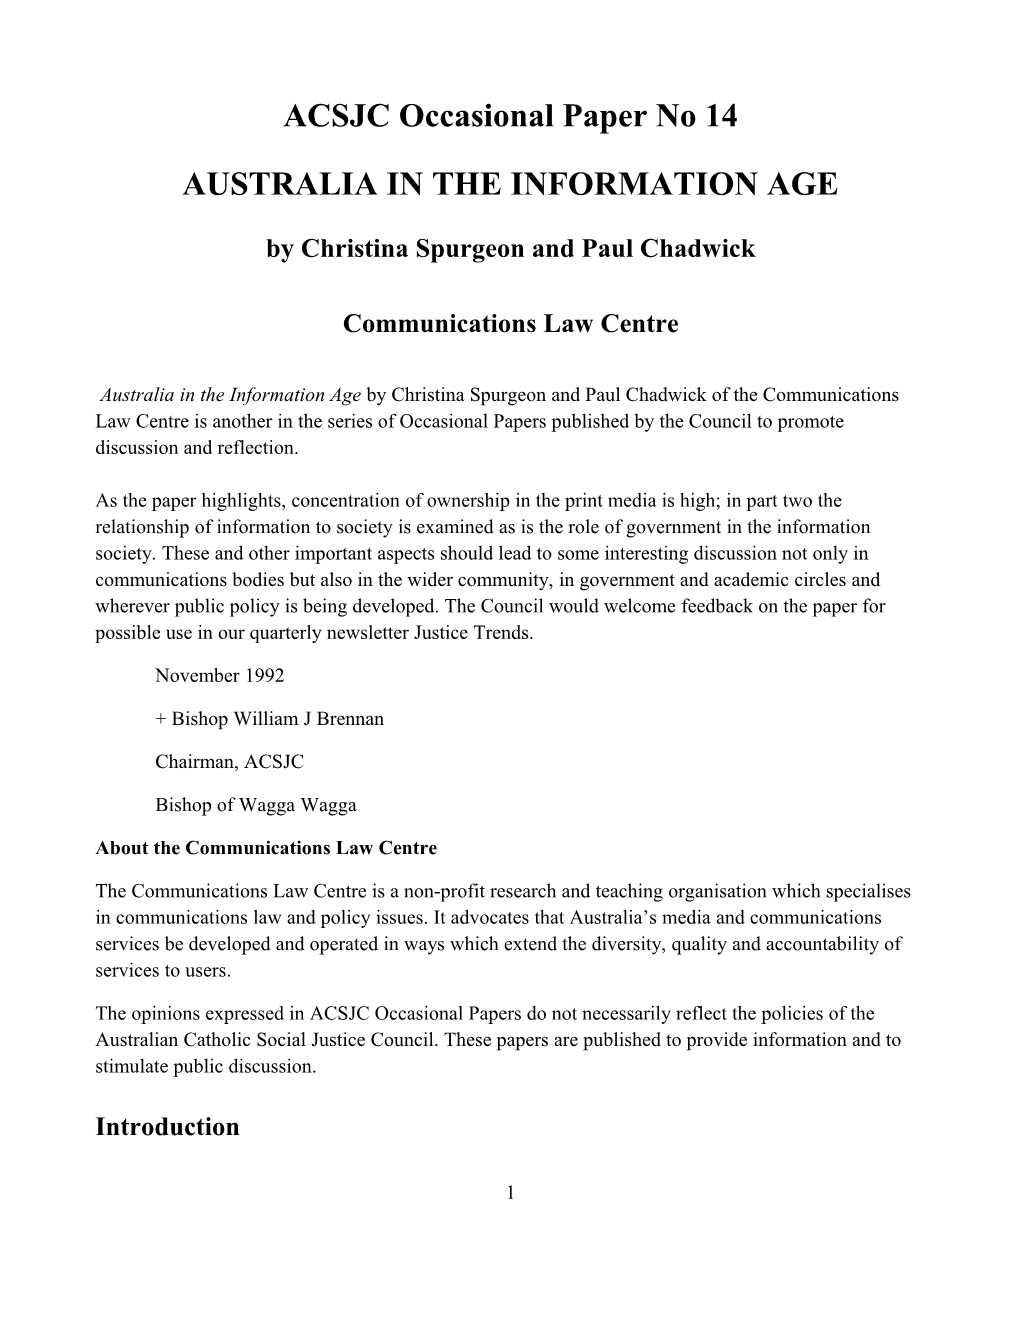 Australia in the Information Age